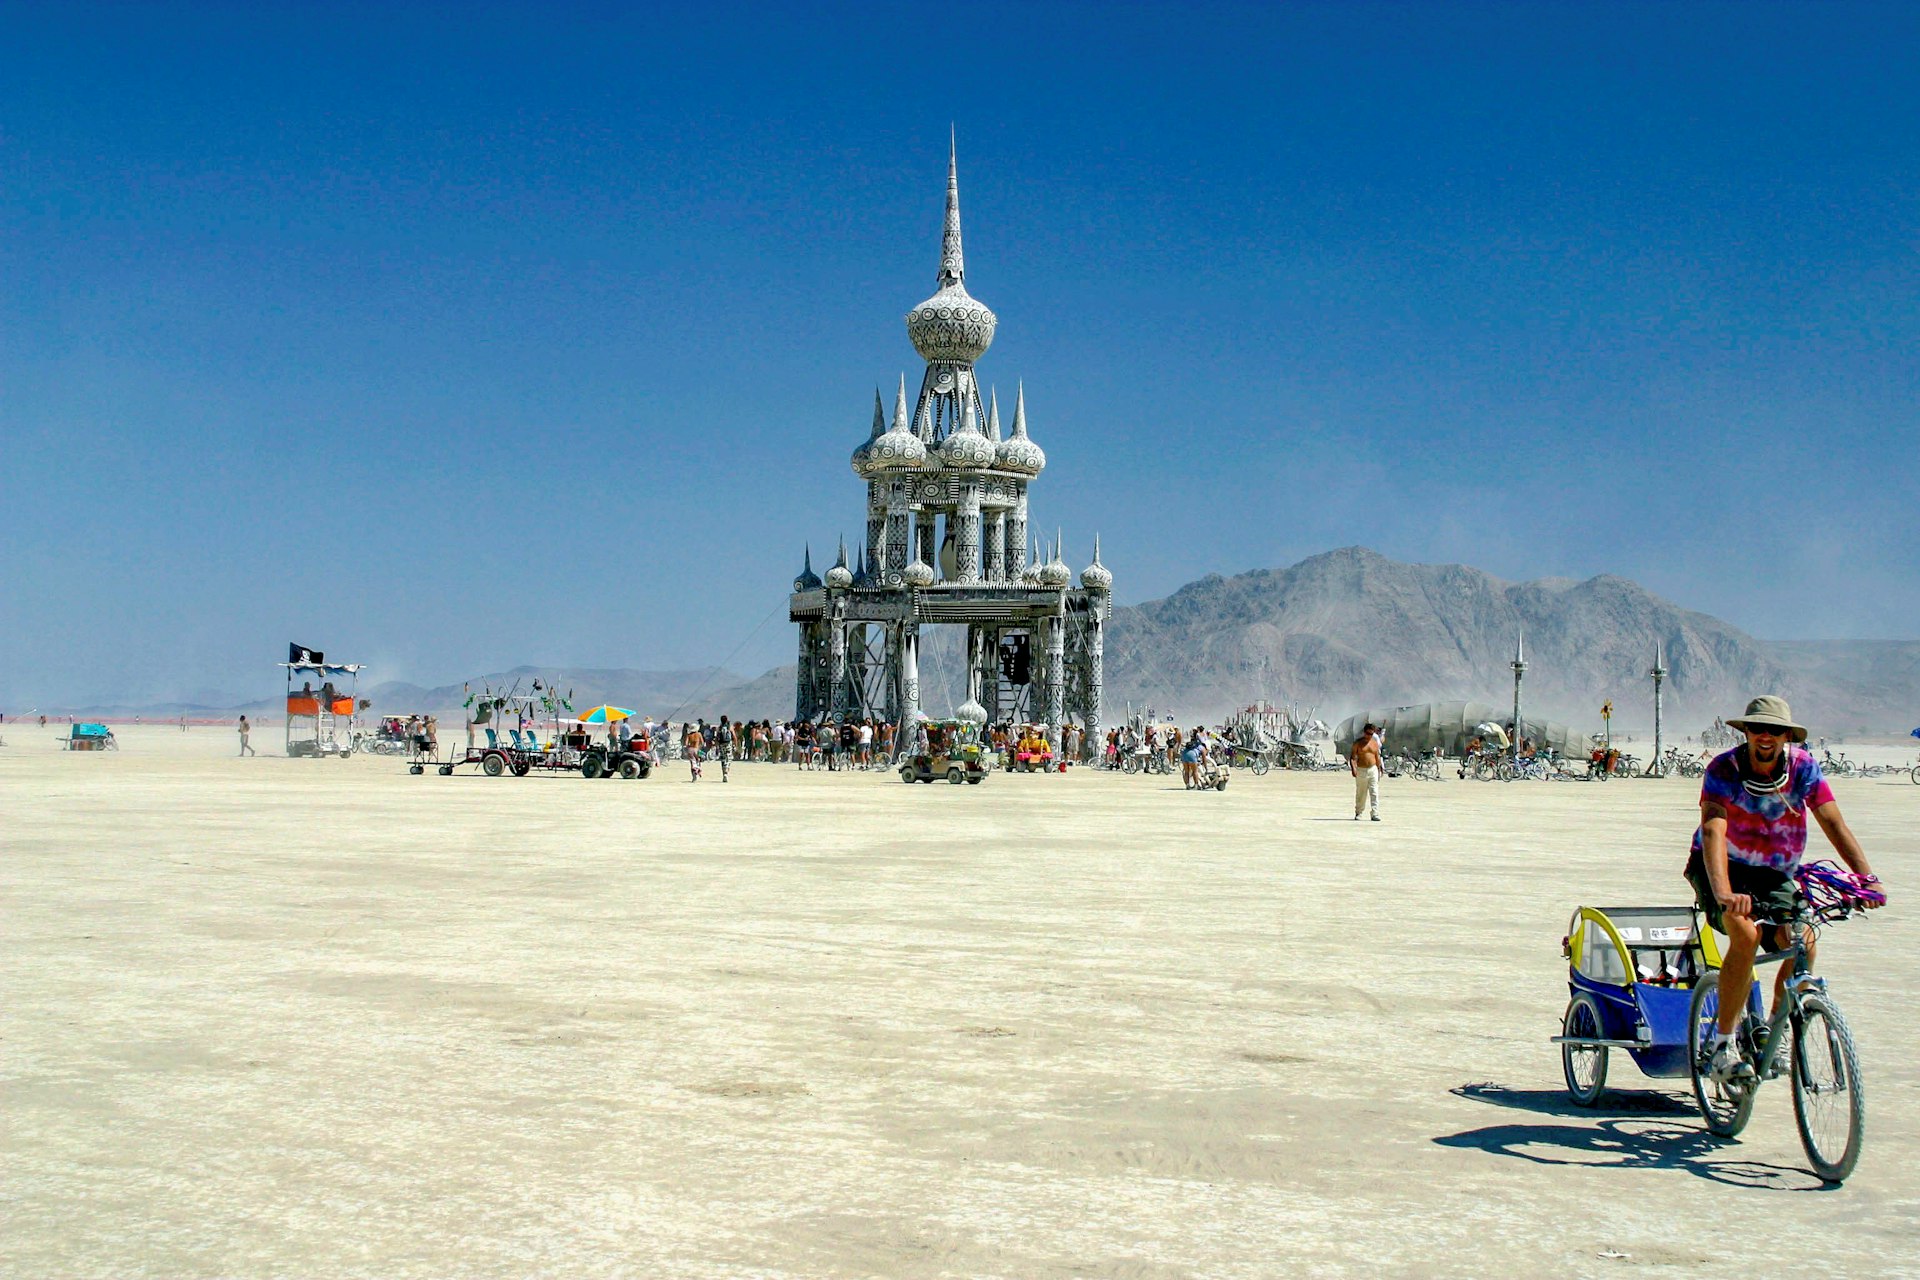 A flat expanse of the Black Rock Desert in Nevada stretches toward a mountain range as people gather at an art installation styled like a building with minarets. A man on a bike pedals in the foreground.